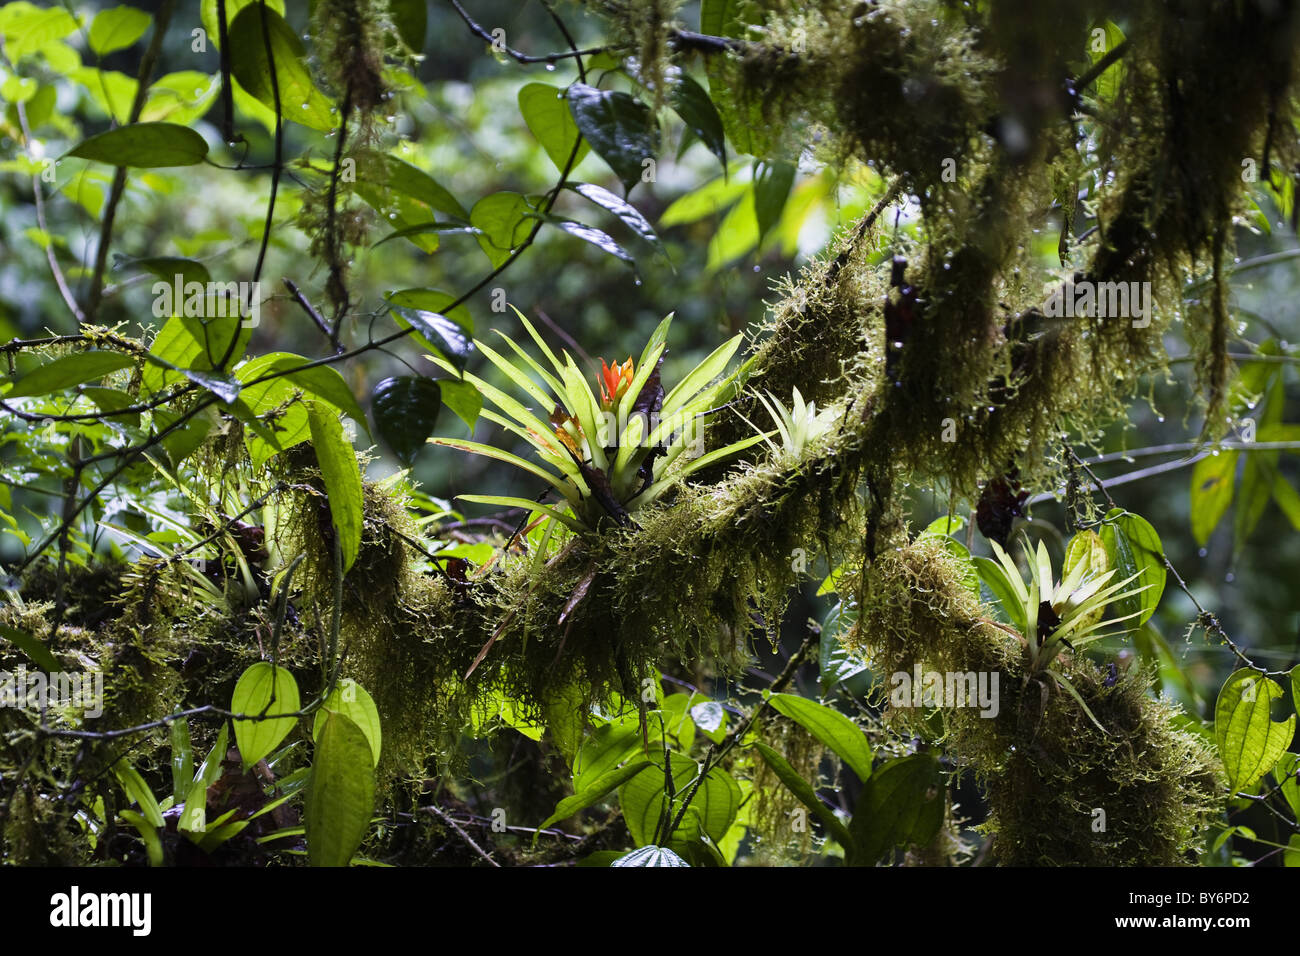 Epiphytes in lowland rainforest, Braulio Carrillo National Park, Costa Rica, Central America Stock Photo